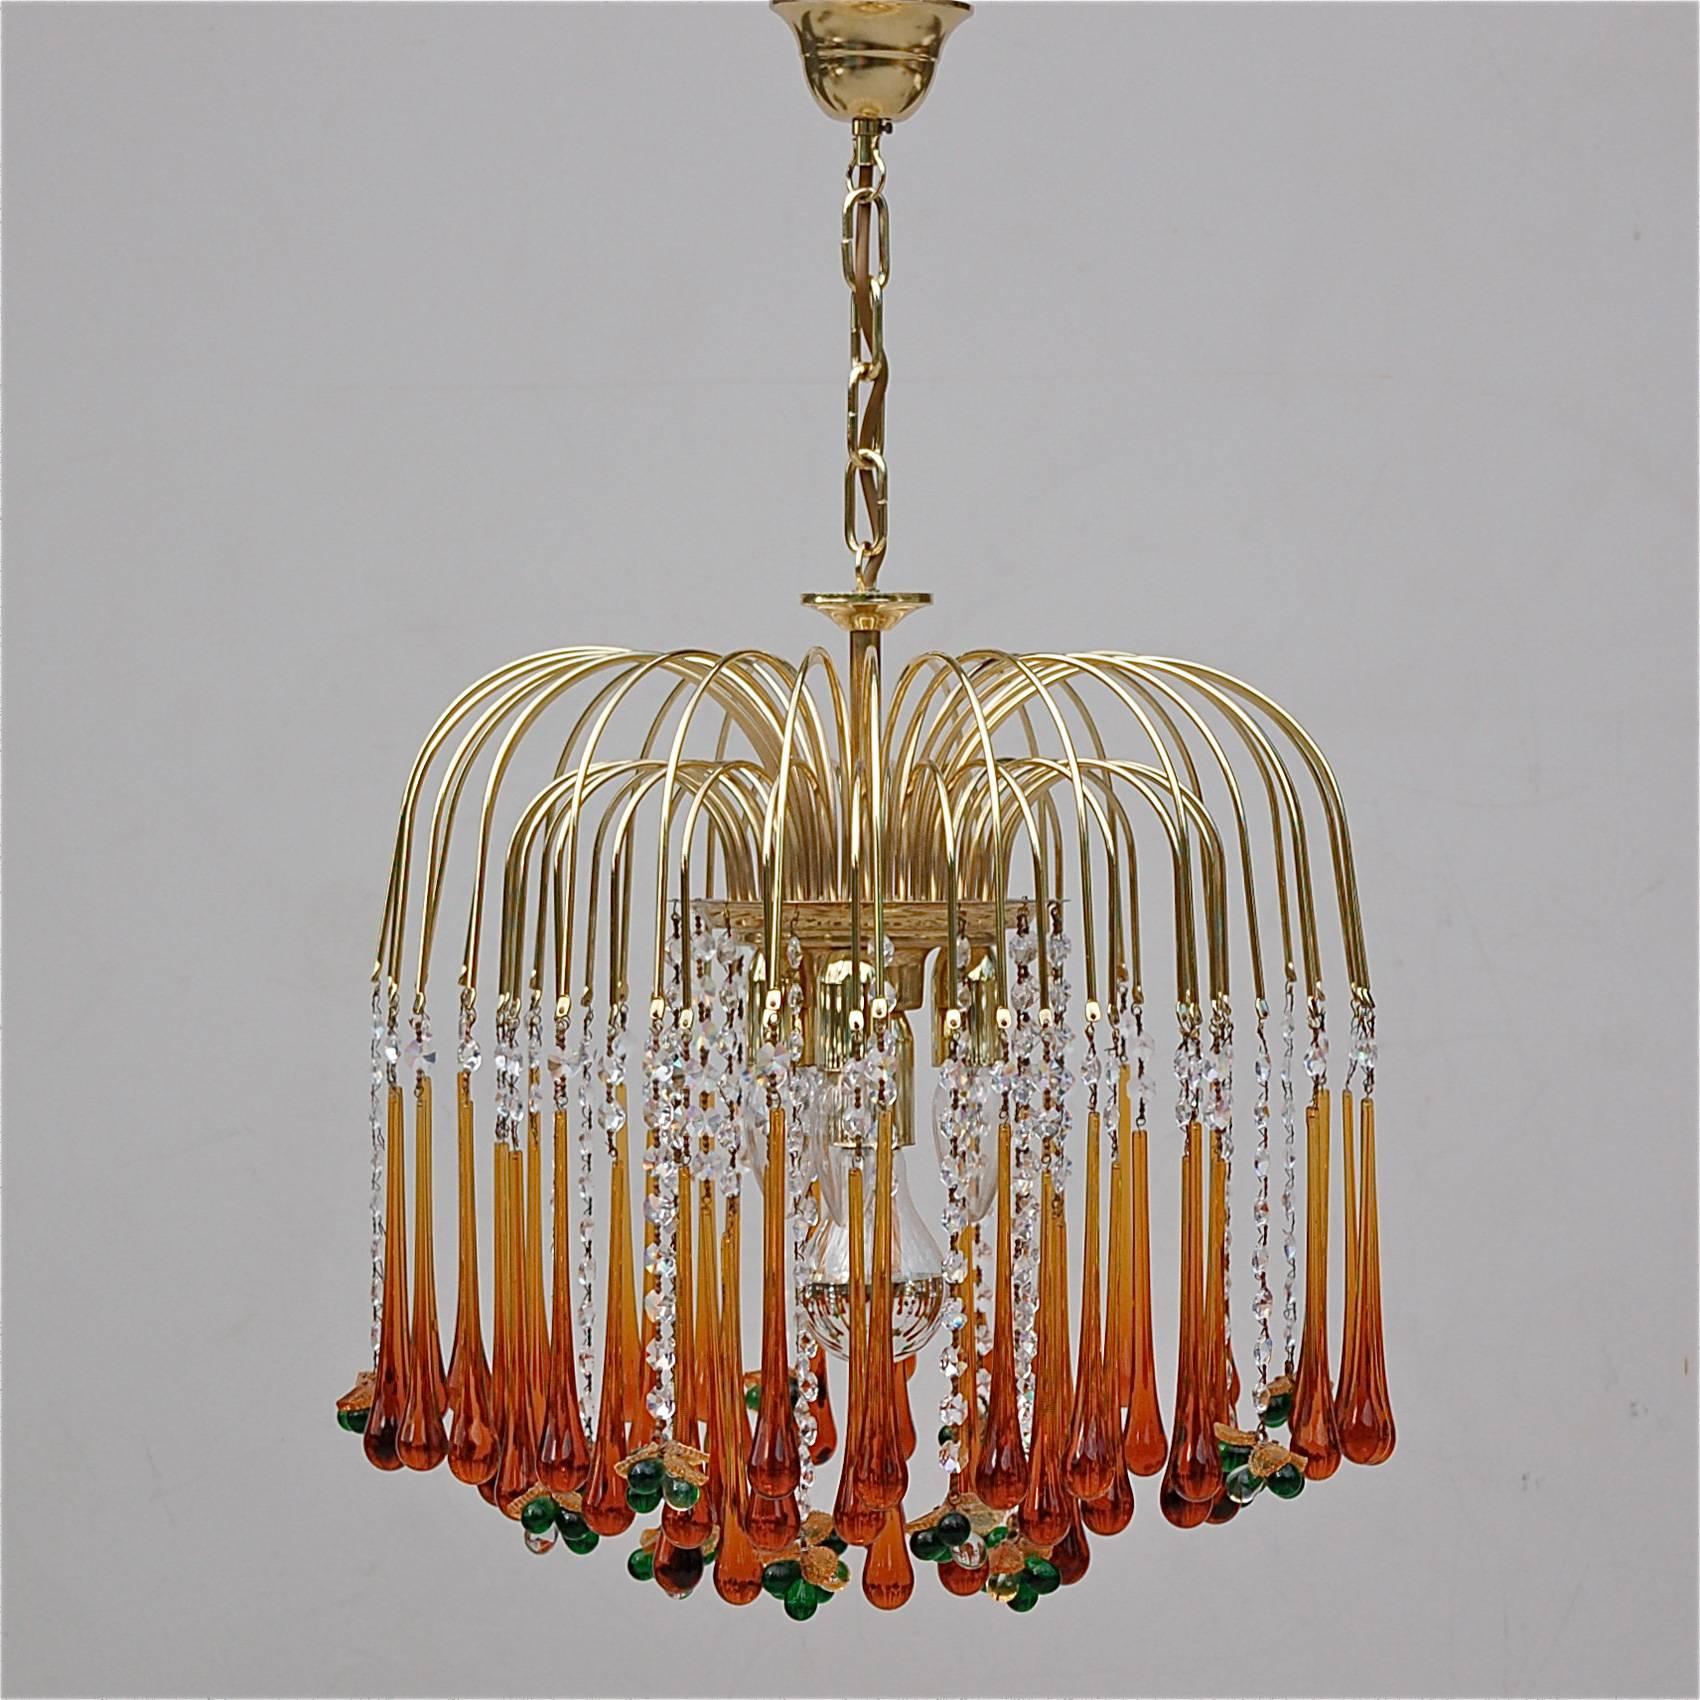 Late 20th century deep amber coloured Venini glass teardrop chandelier. There are 51 teardrops suspended from a double ring of delicate extensions that seem to jet from the central light fitting like a water fountain. The teardrops are punctuated at